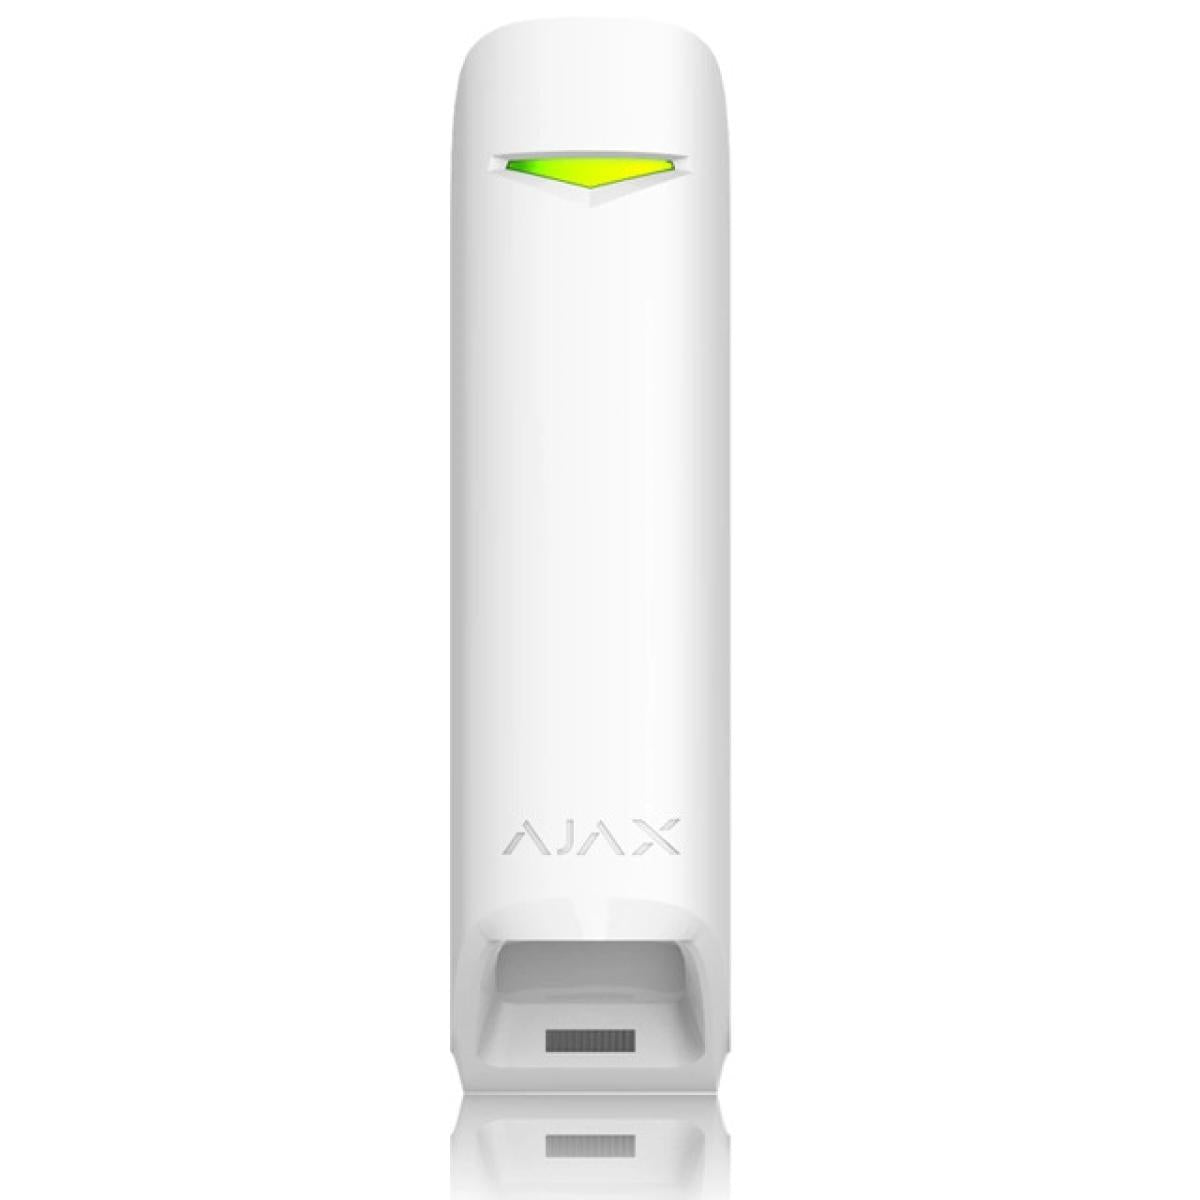 Ajax MotionProtect Curtain Narrow beam indoor motion detector. Protects windows, doors, and valuables White